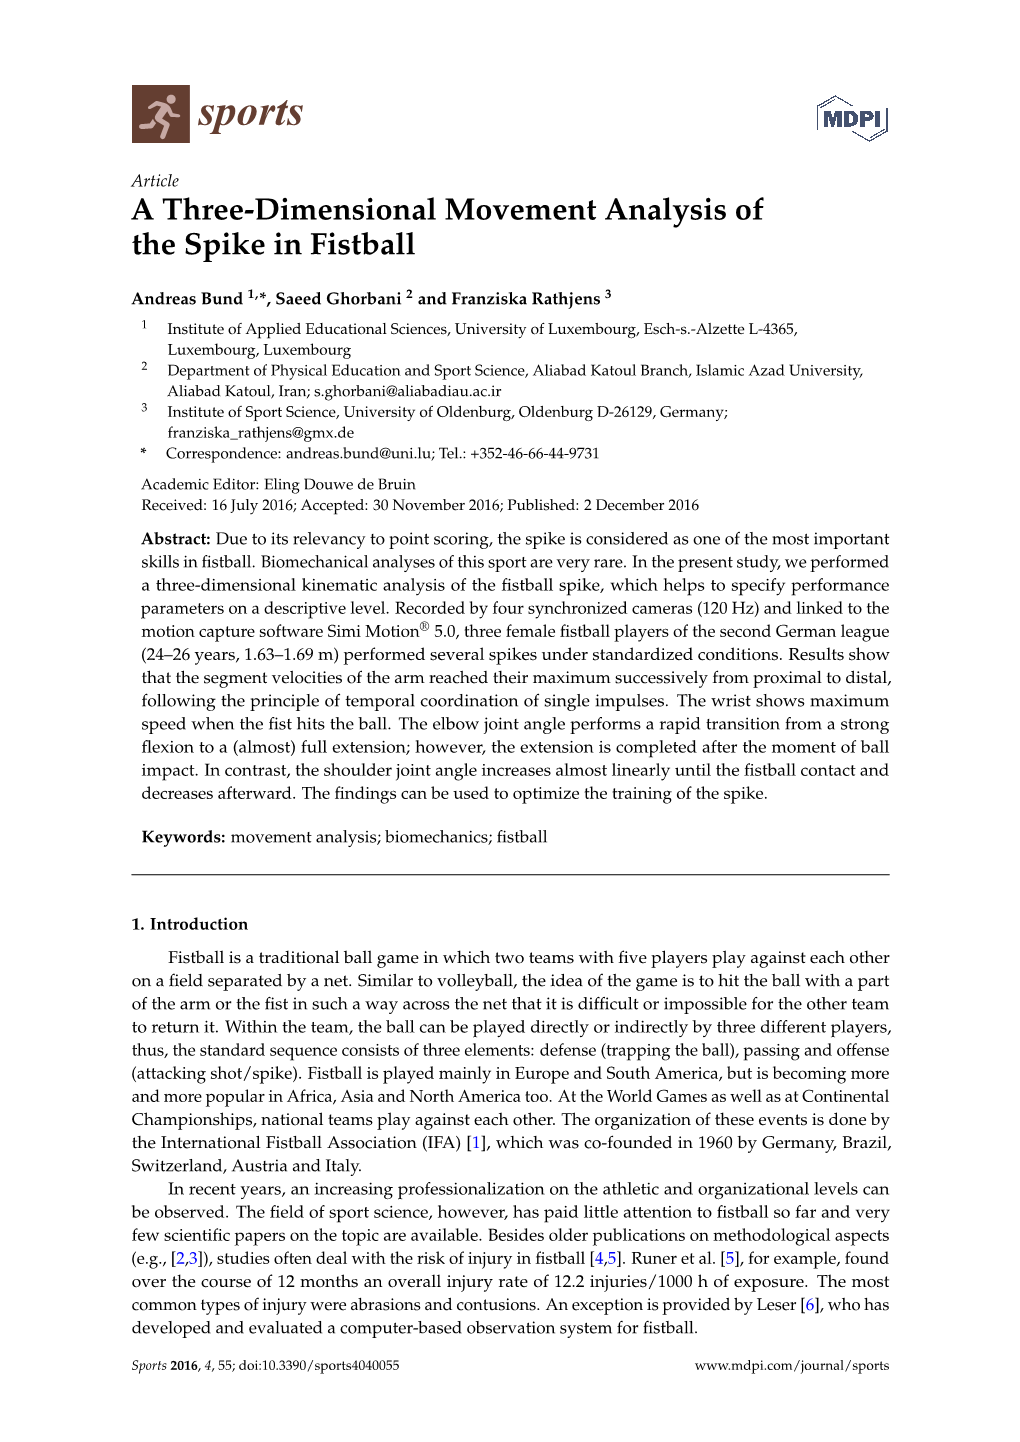 A Three-Dimensional Movement Analysis of the Spike in Fistball